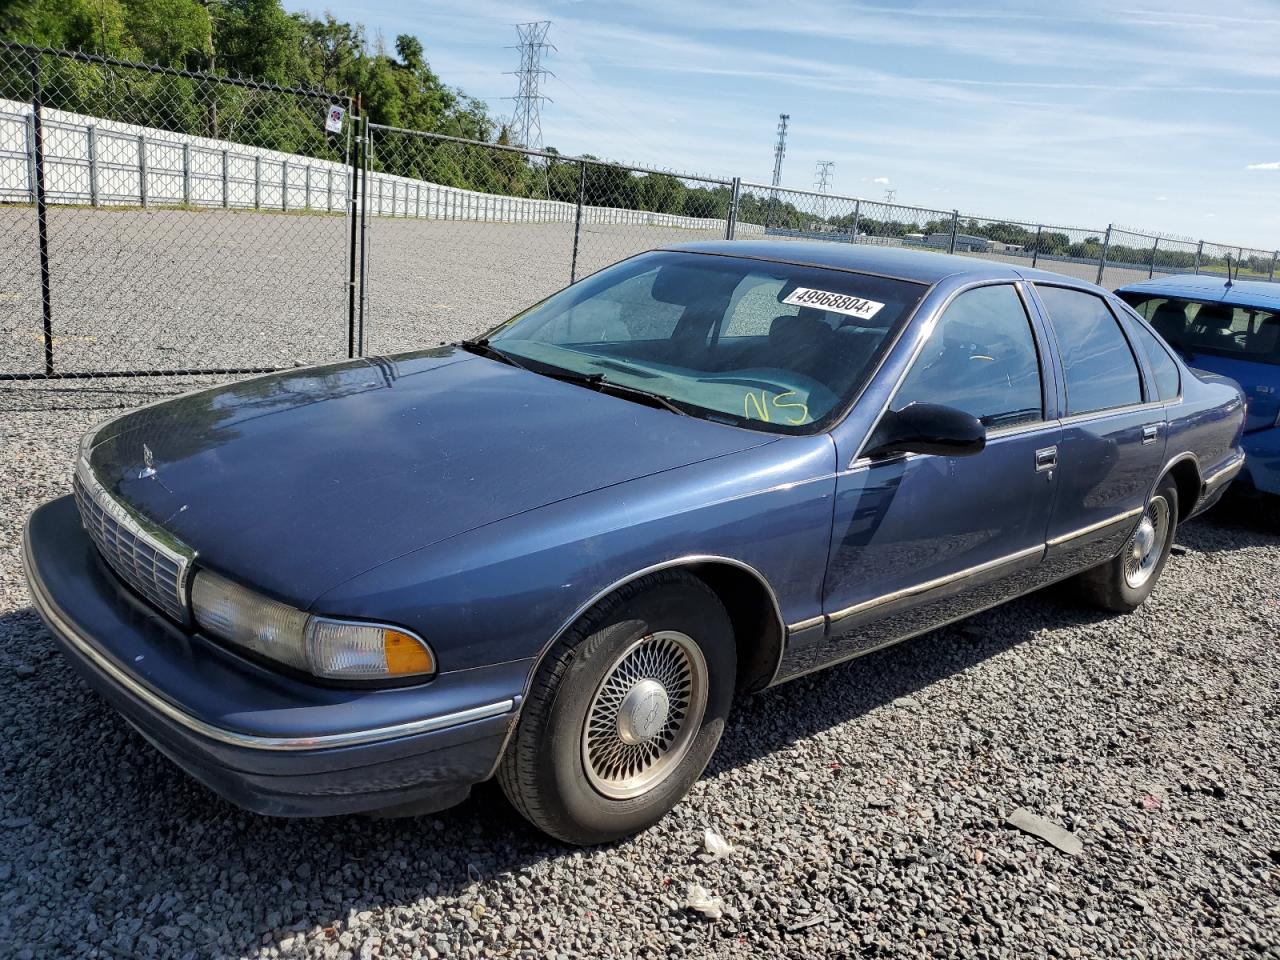 vin: 1G1BL52W0TR131615 1G1BL52W0TR131615 1996 chevrolet caprice 4300 for Sale in 33578 7610, Fl - Tampa South, Riverview, USA